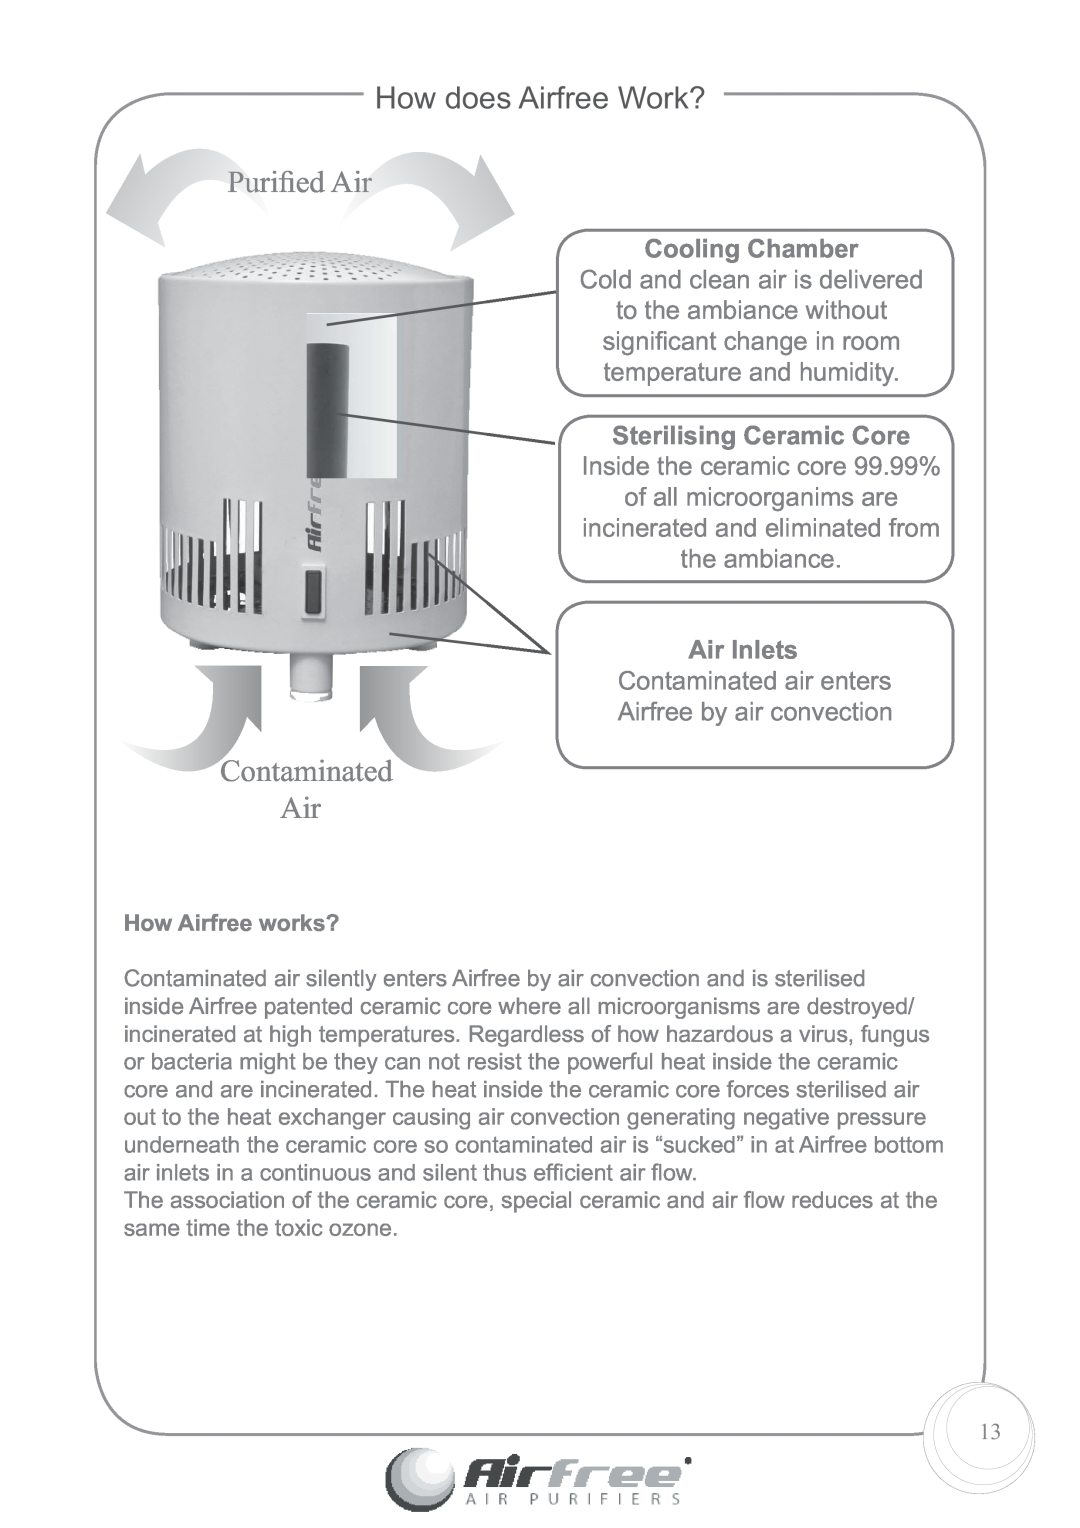 Airfree 60 How does Airfree Work?, Puriﬁed Air, Contaminated Air, Cooling Chamber, Cold and clean air is delivered 